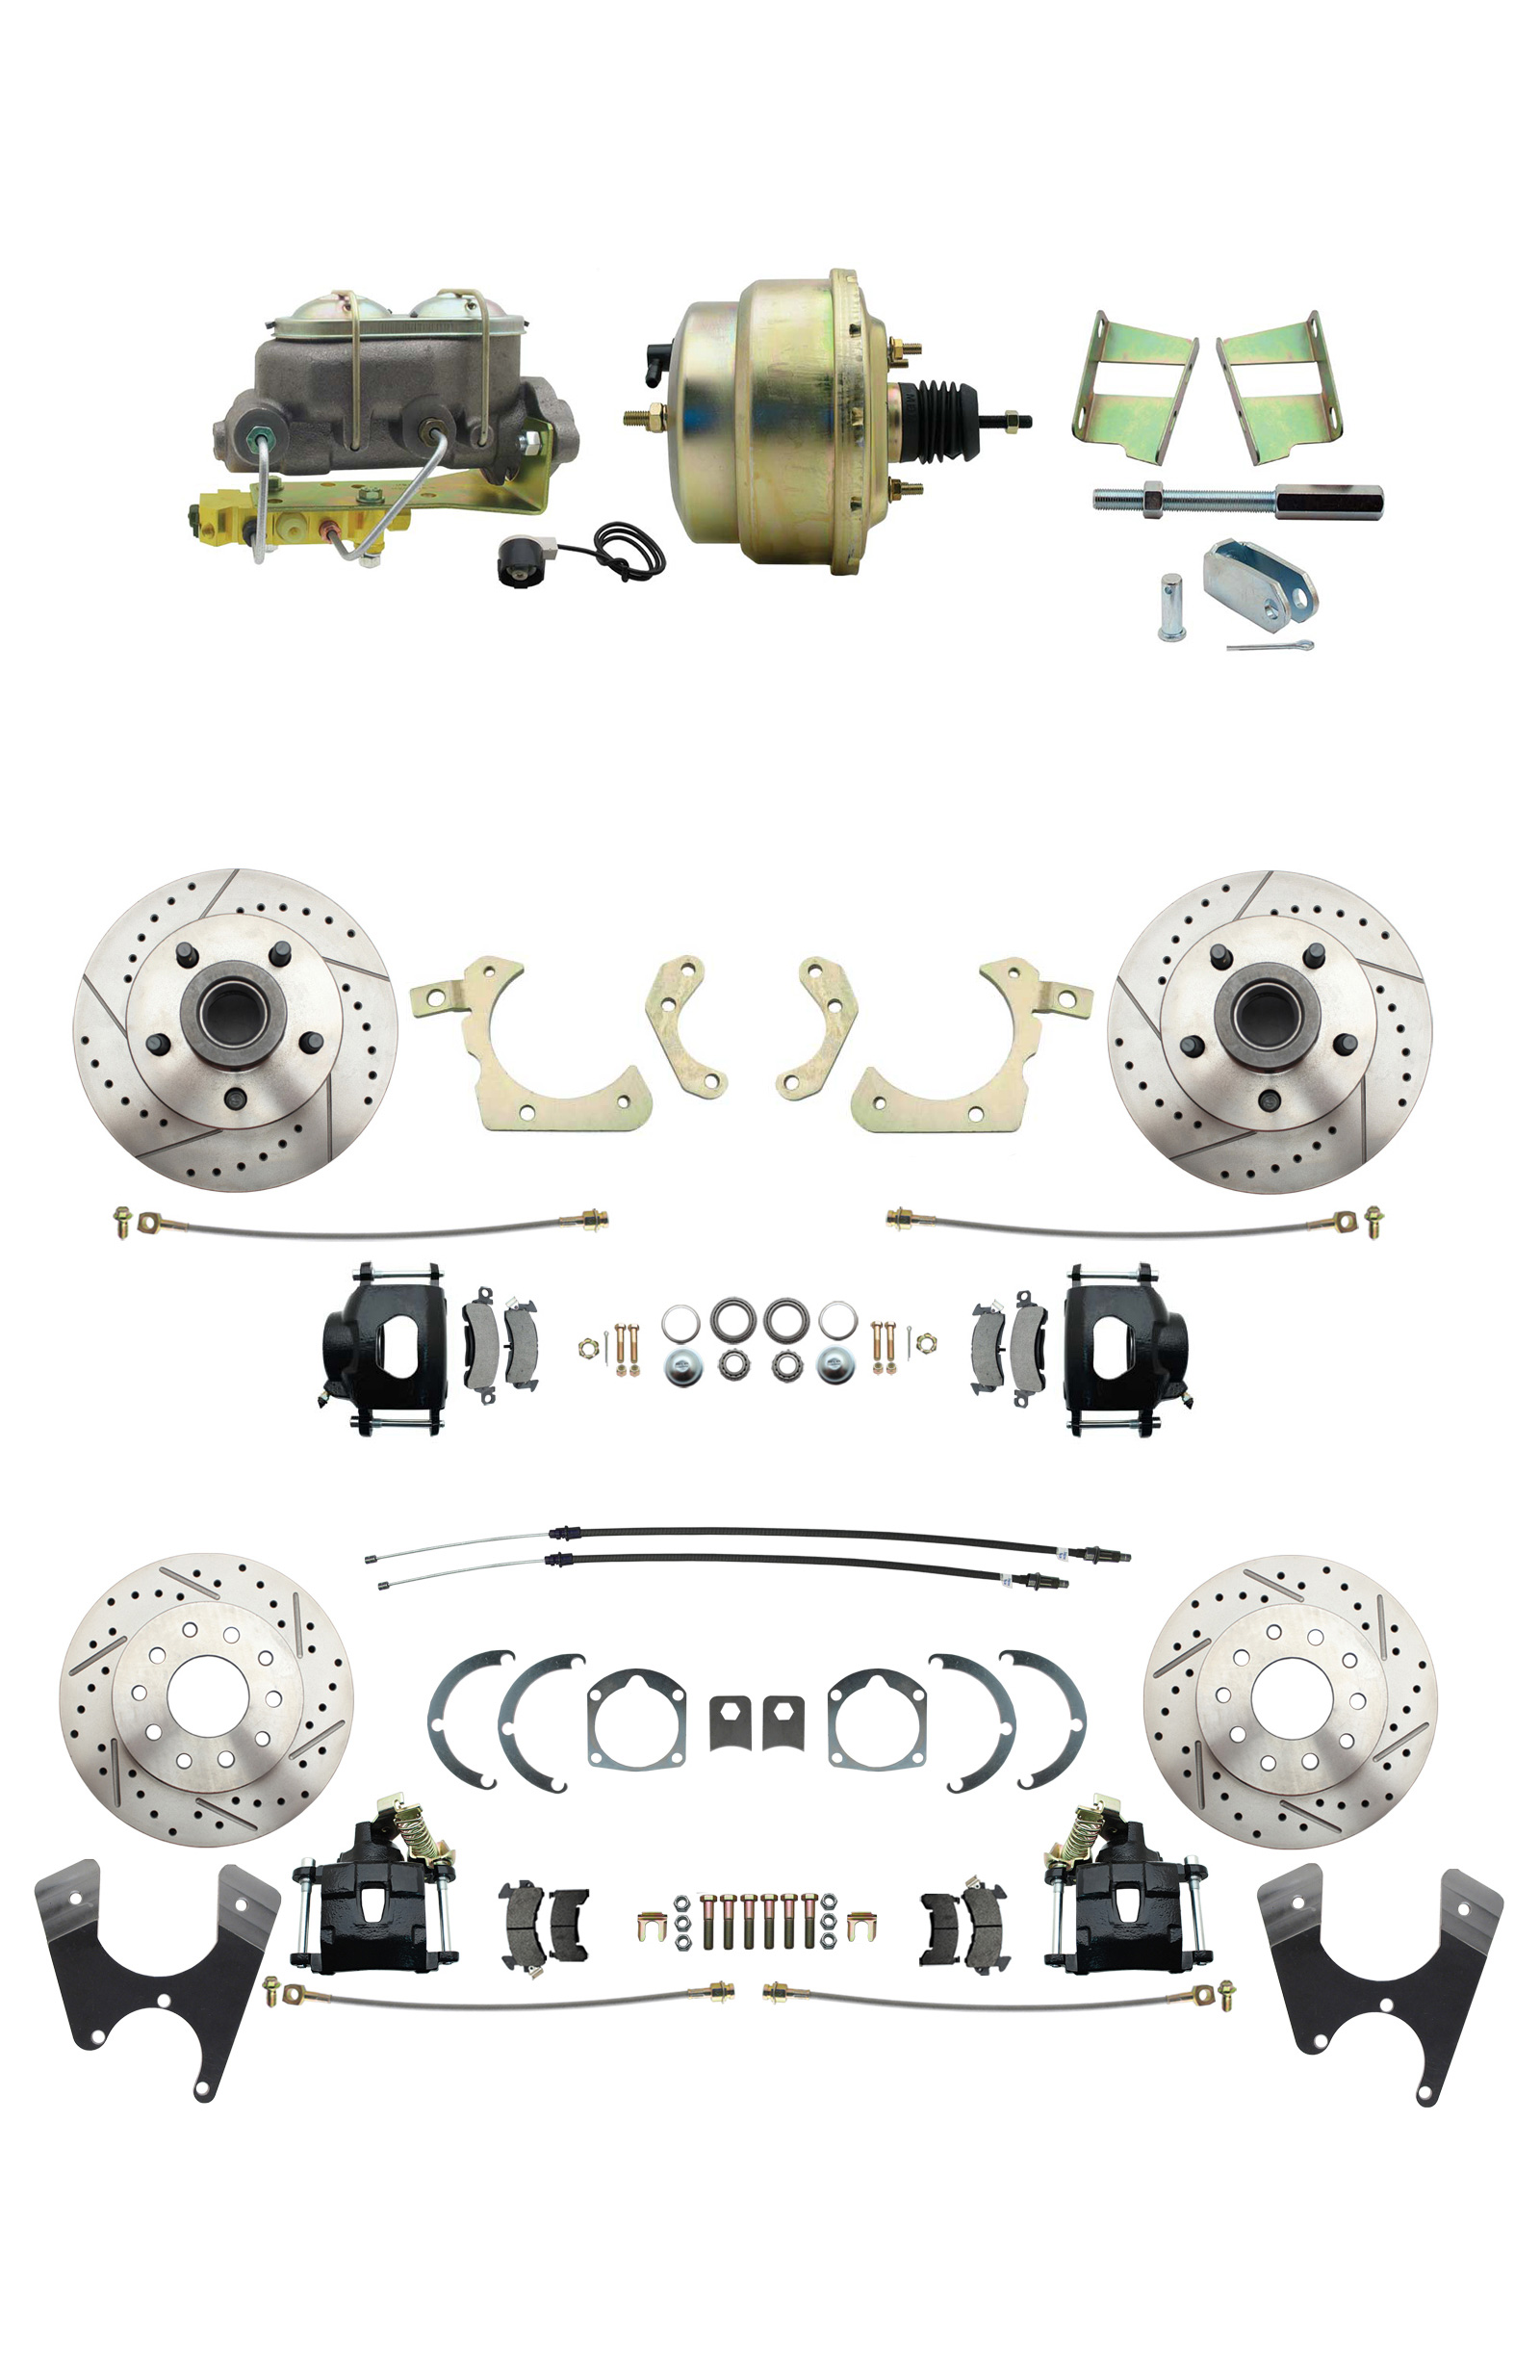 1959-1964 GM Full Size Front & Rear Power Disc Brake Kit Black Powder Coated Calipers Drilled/Slotted Rotors (Impala, Bel Air, Biscayne) & 8 Dual Zinc Booster Conversion Kit W/ Cast Iron Master Cylinder Bottom Mount Dis